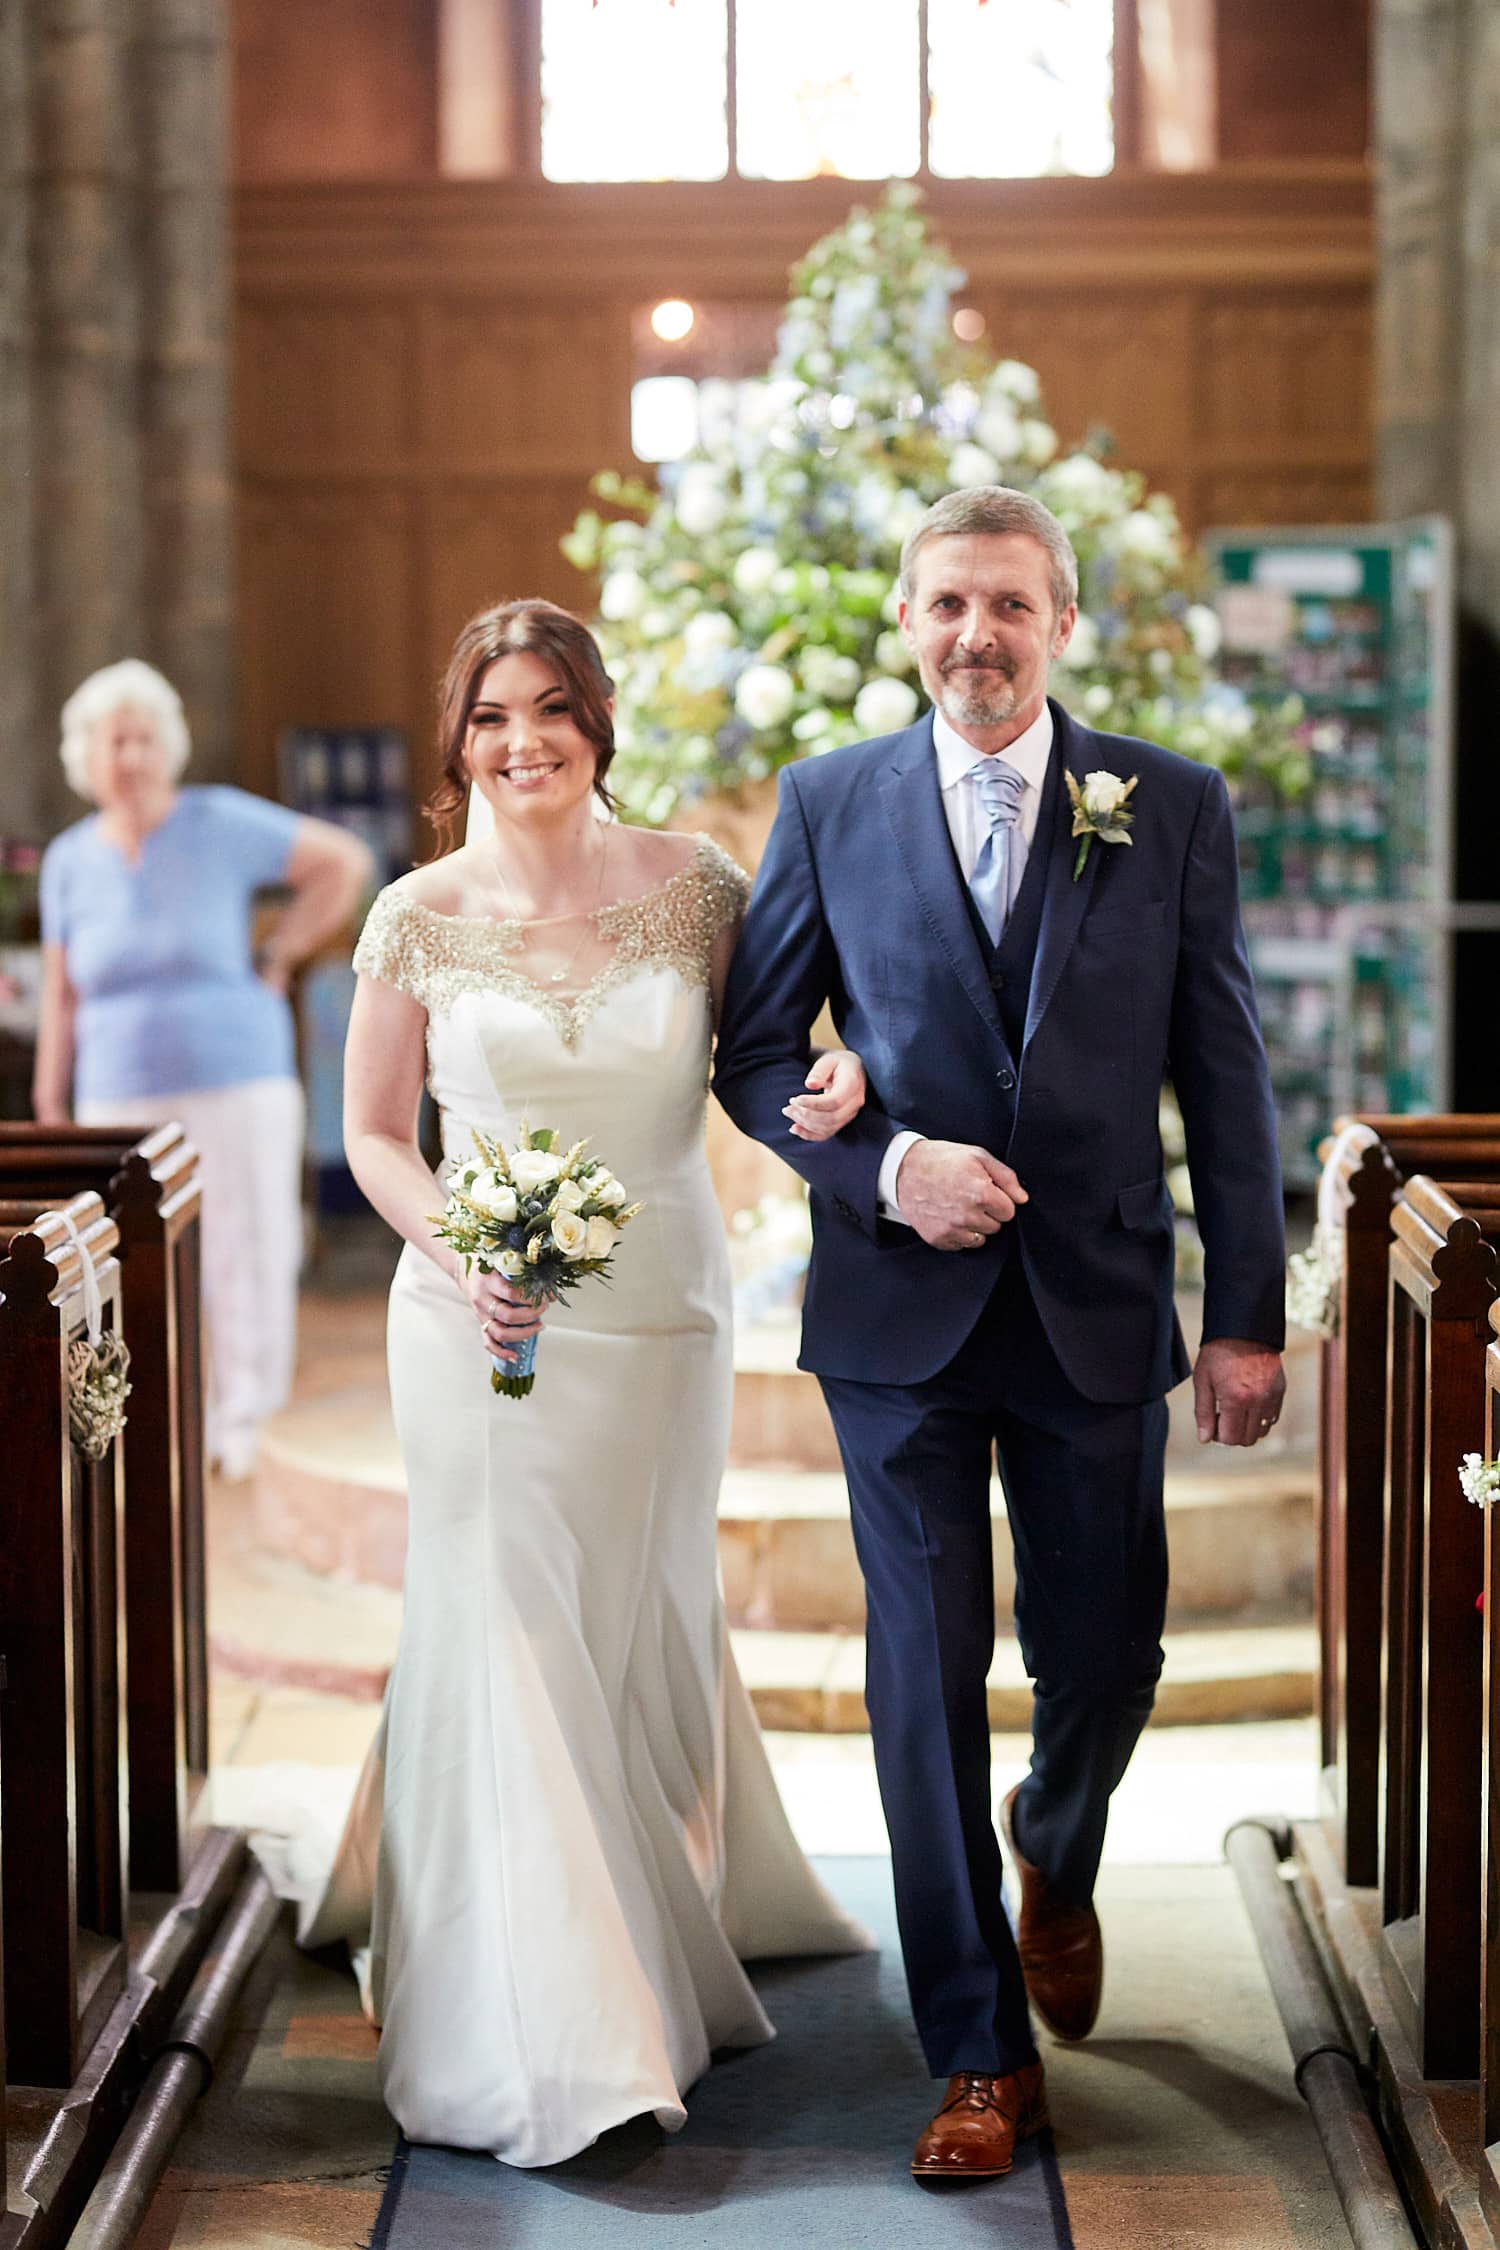 A bride walked down the aisle by her father